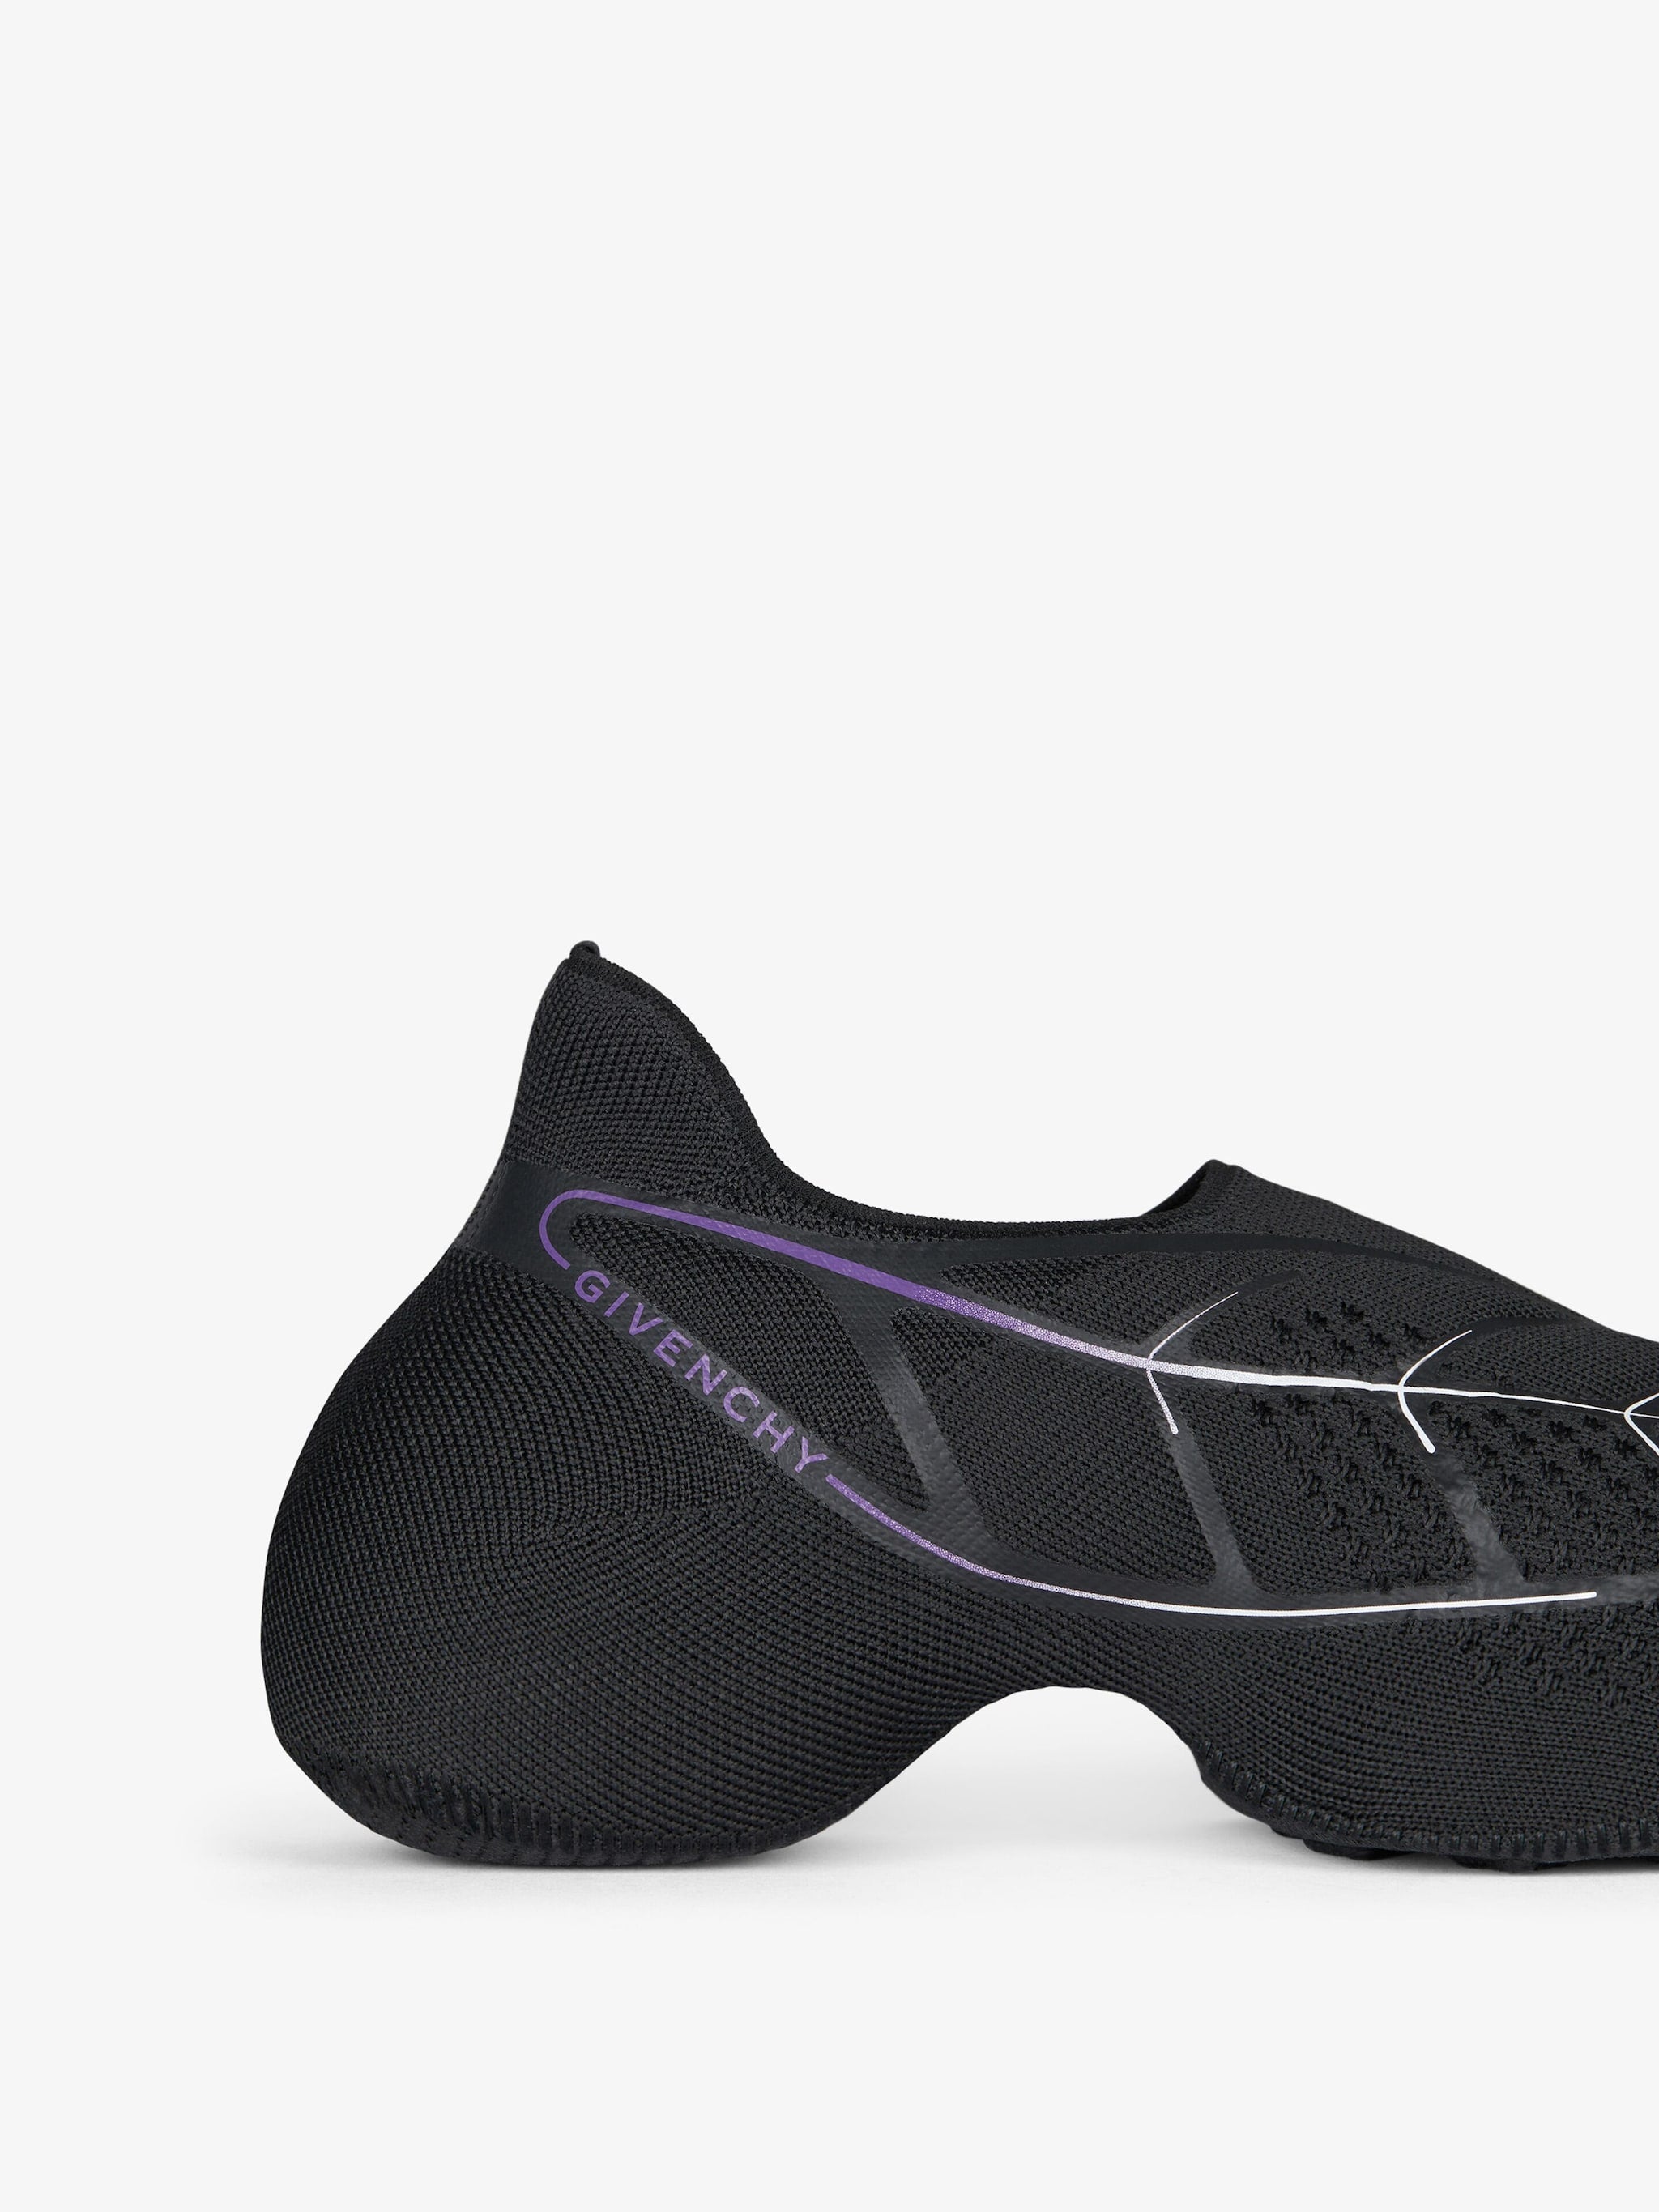 Givenchy TK-360+ Sneakers In Mesh Black / Purple